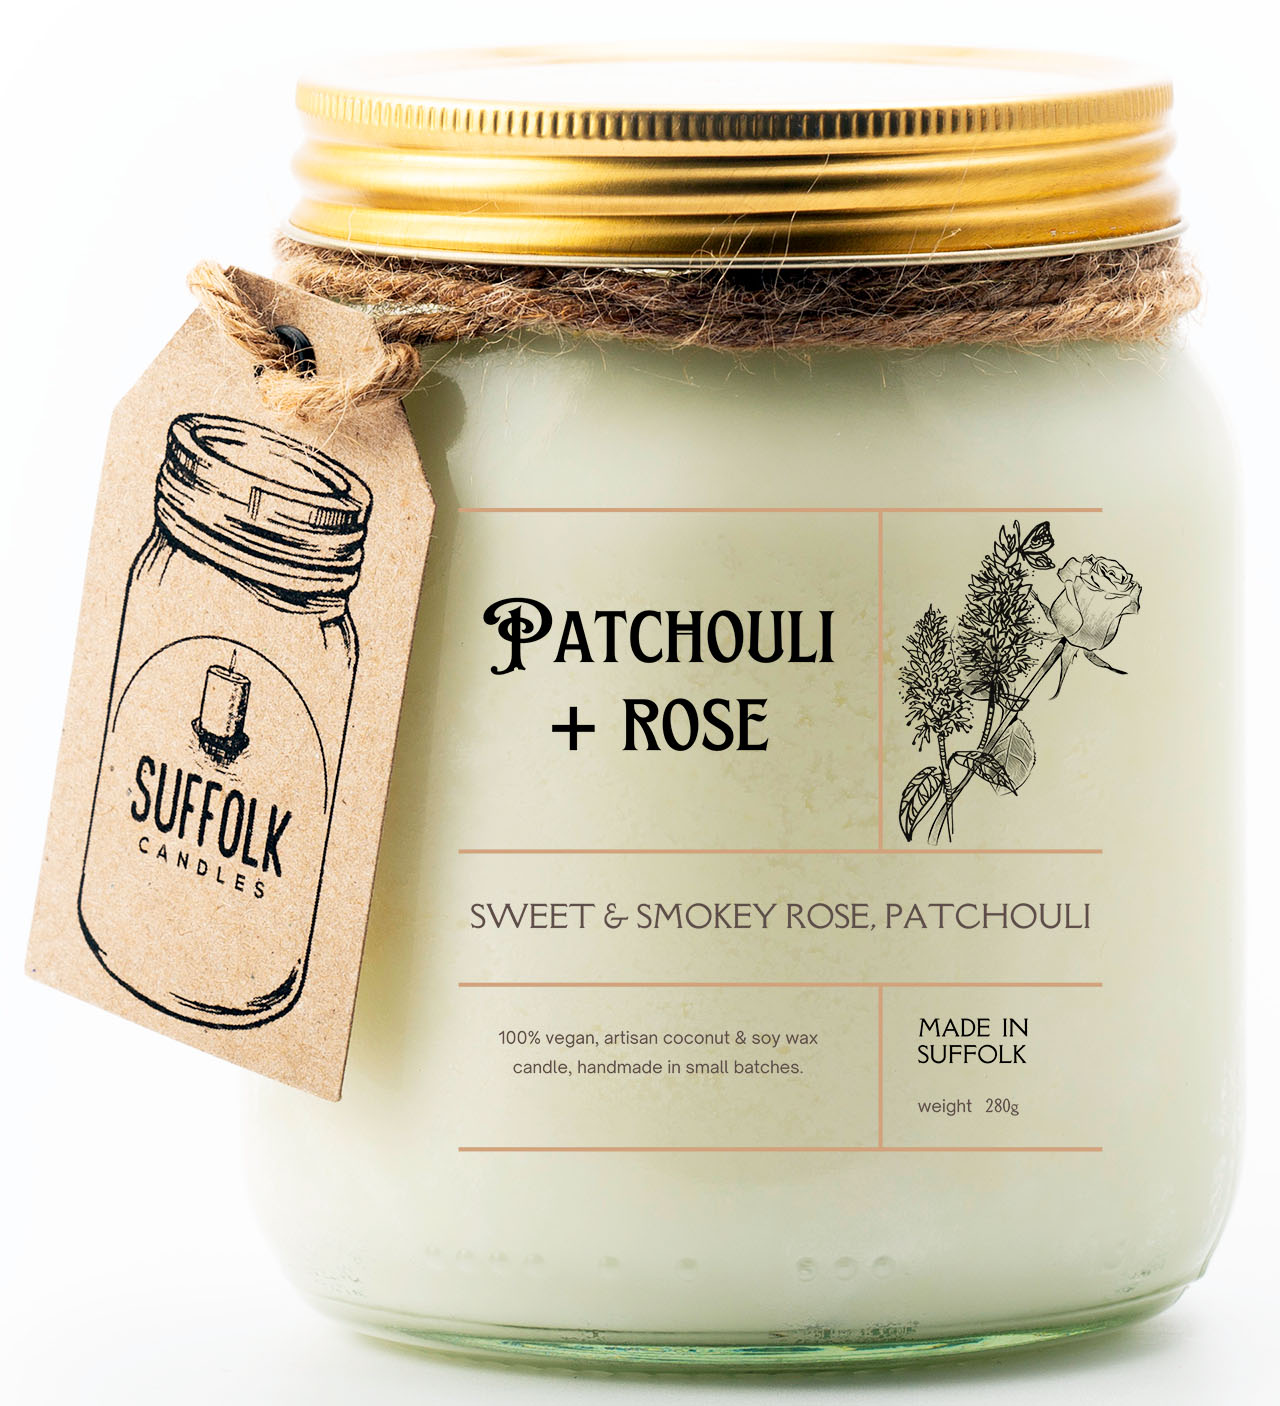 Patchouli & Rose Scented Candle Jar | Uplifting Scent of Rose, Sweet & Smokey with Earthy Patchouli